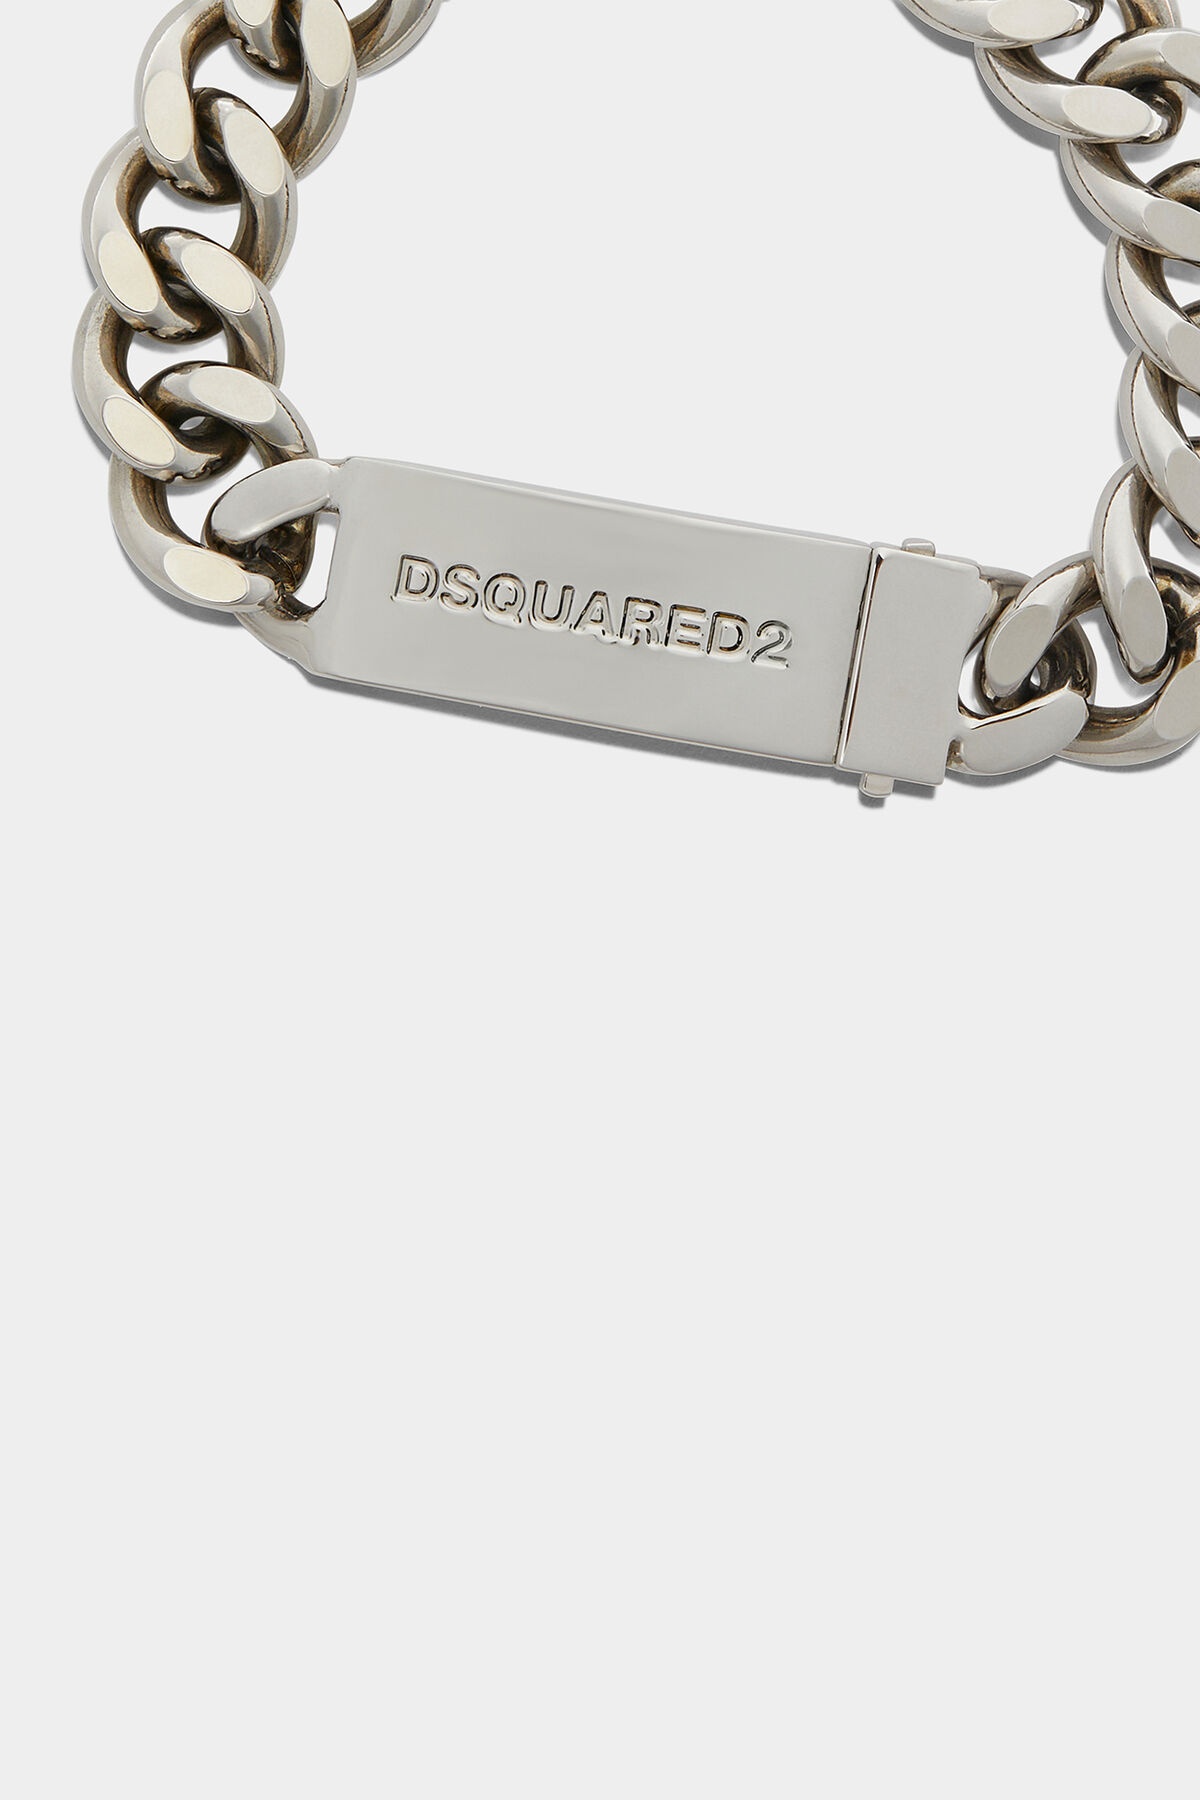 CHAINED2 BRACELETS - 2